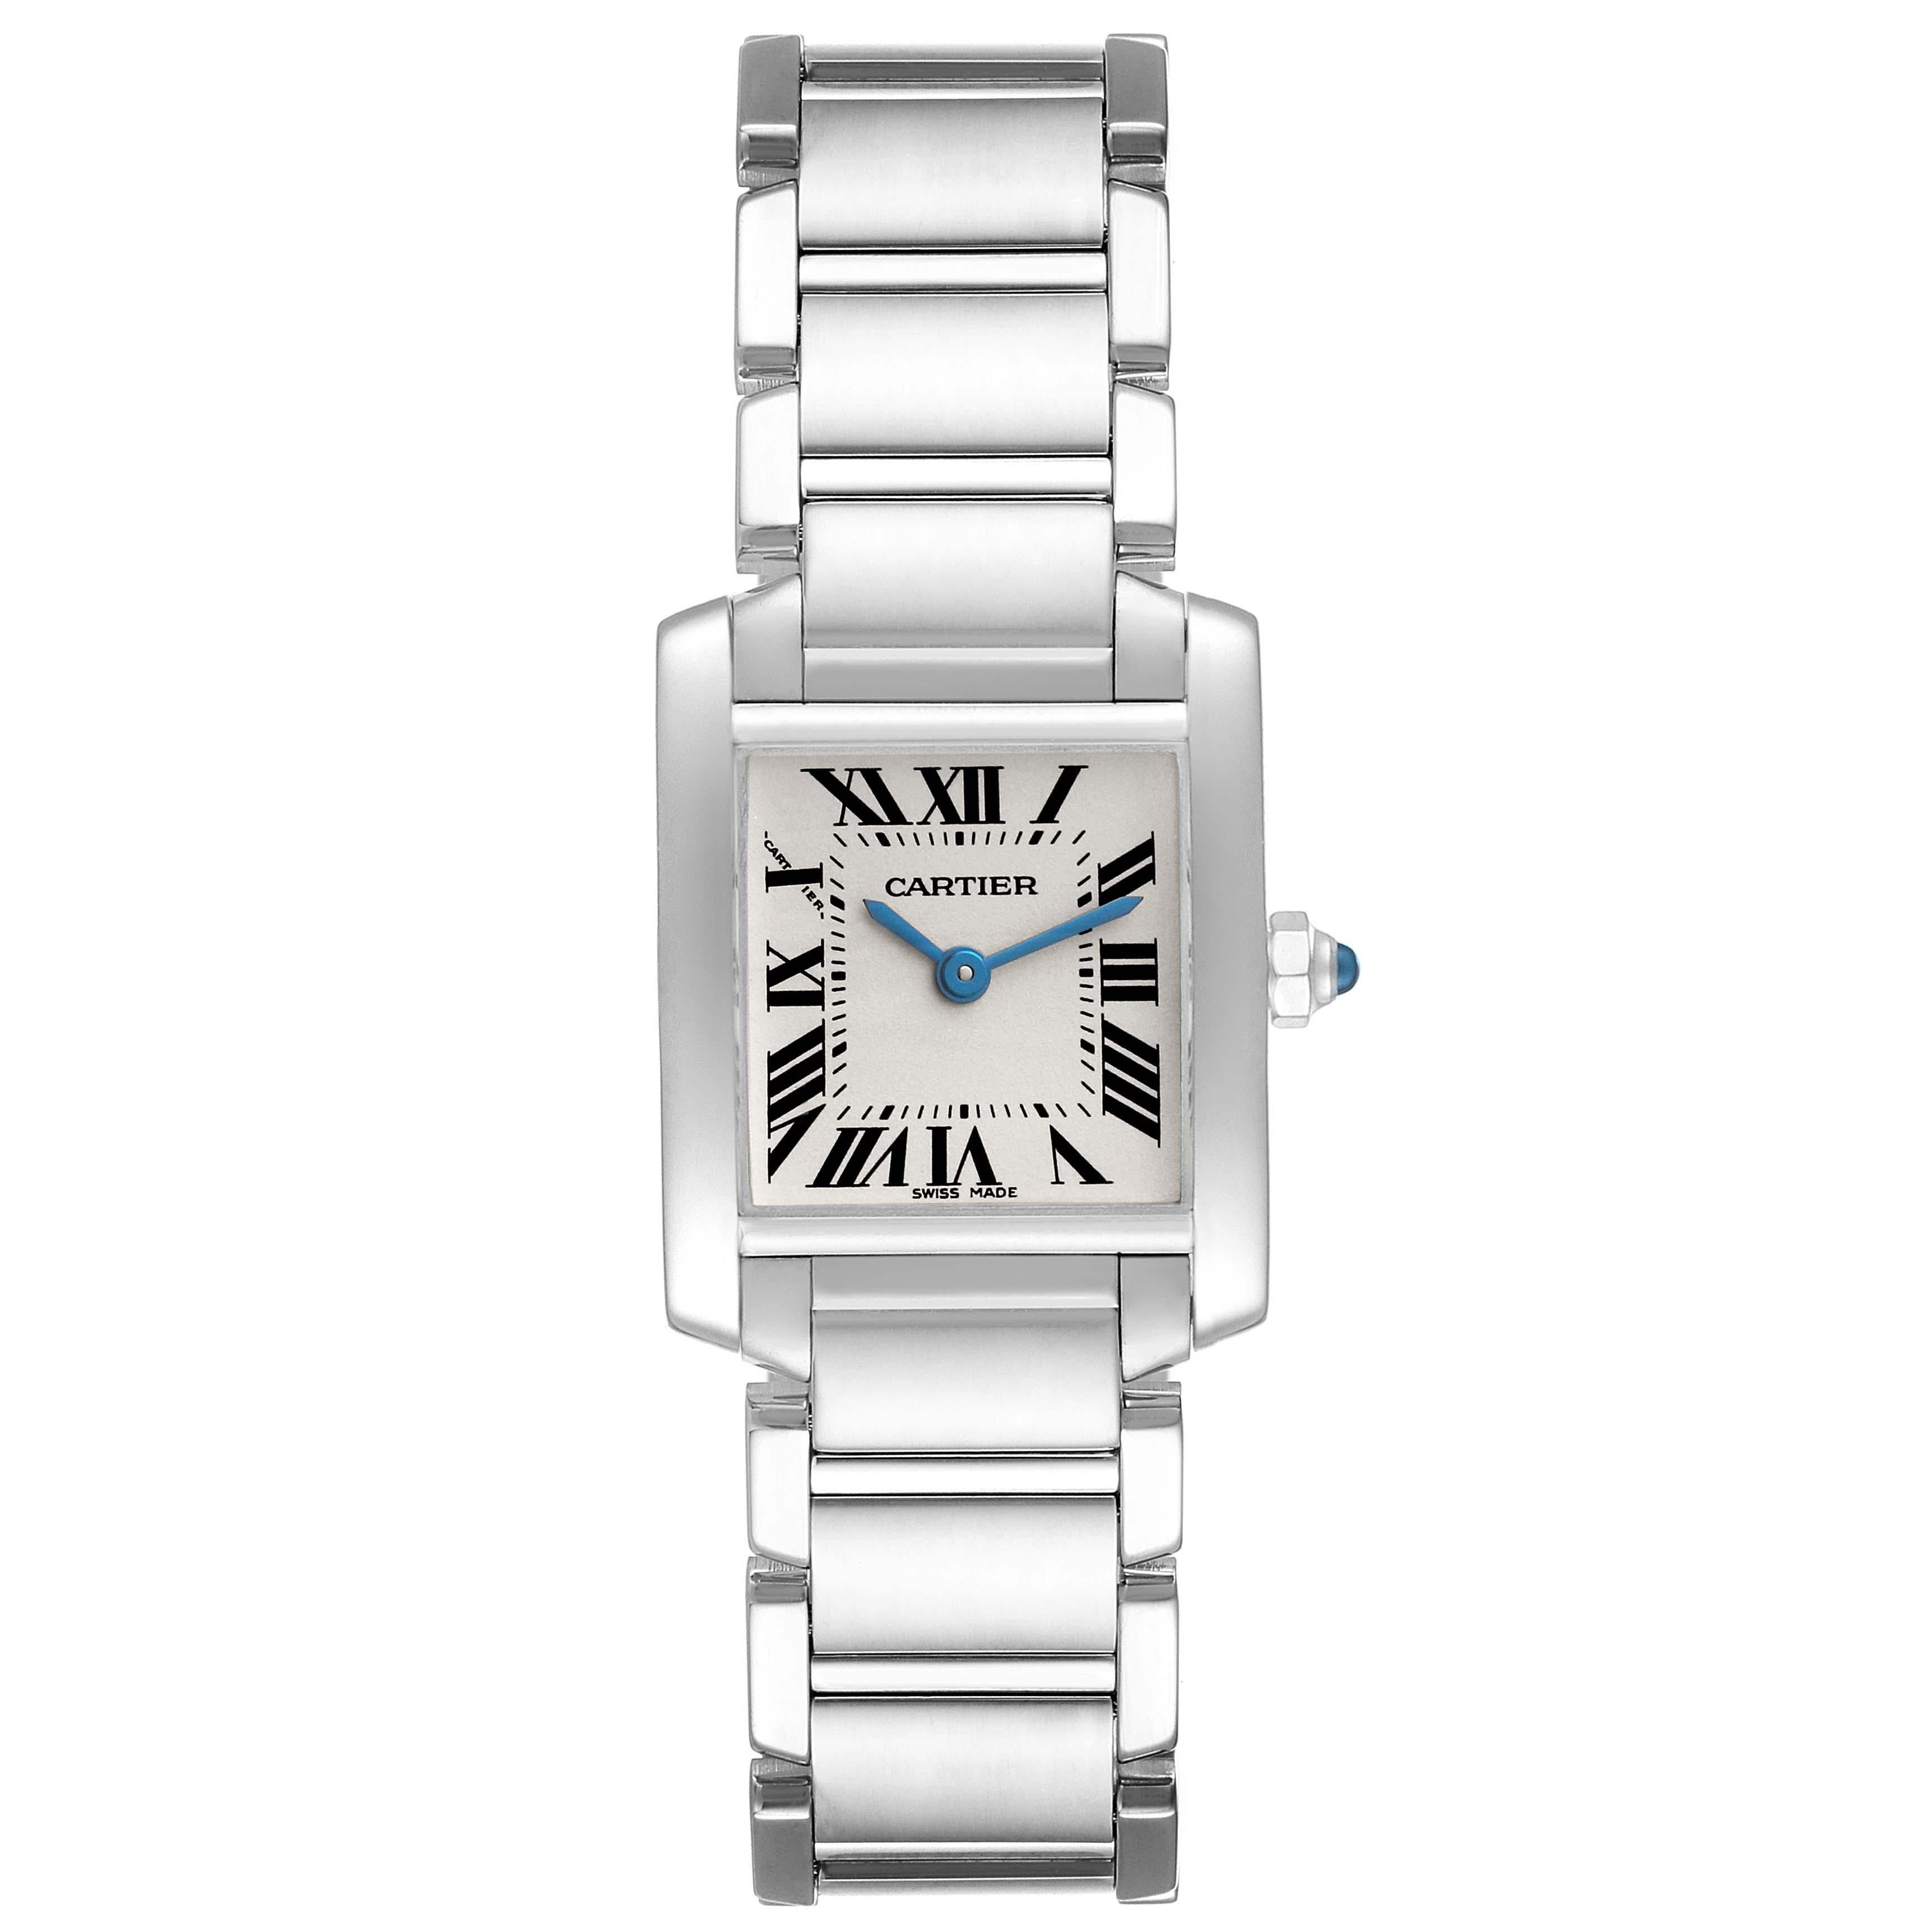 Cartier Tank Francaise White Gold Quartz Ladies Watch W50012S3 Box Papers. Quartz movement. Rectangular 18K white gold 20.0 x 25.0 mm case. Octagonal crown set with a blue sapphire cabochon. . Scratch resistant sapphire crystal. Silvered dial with